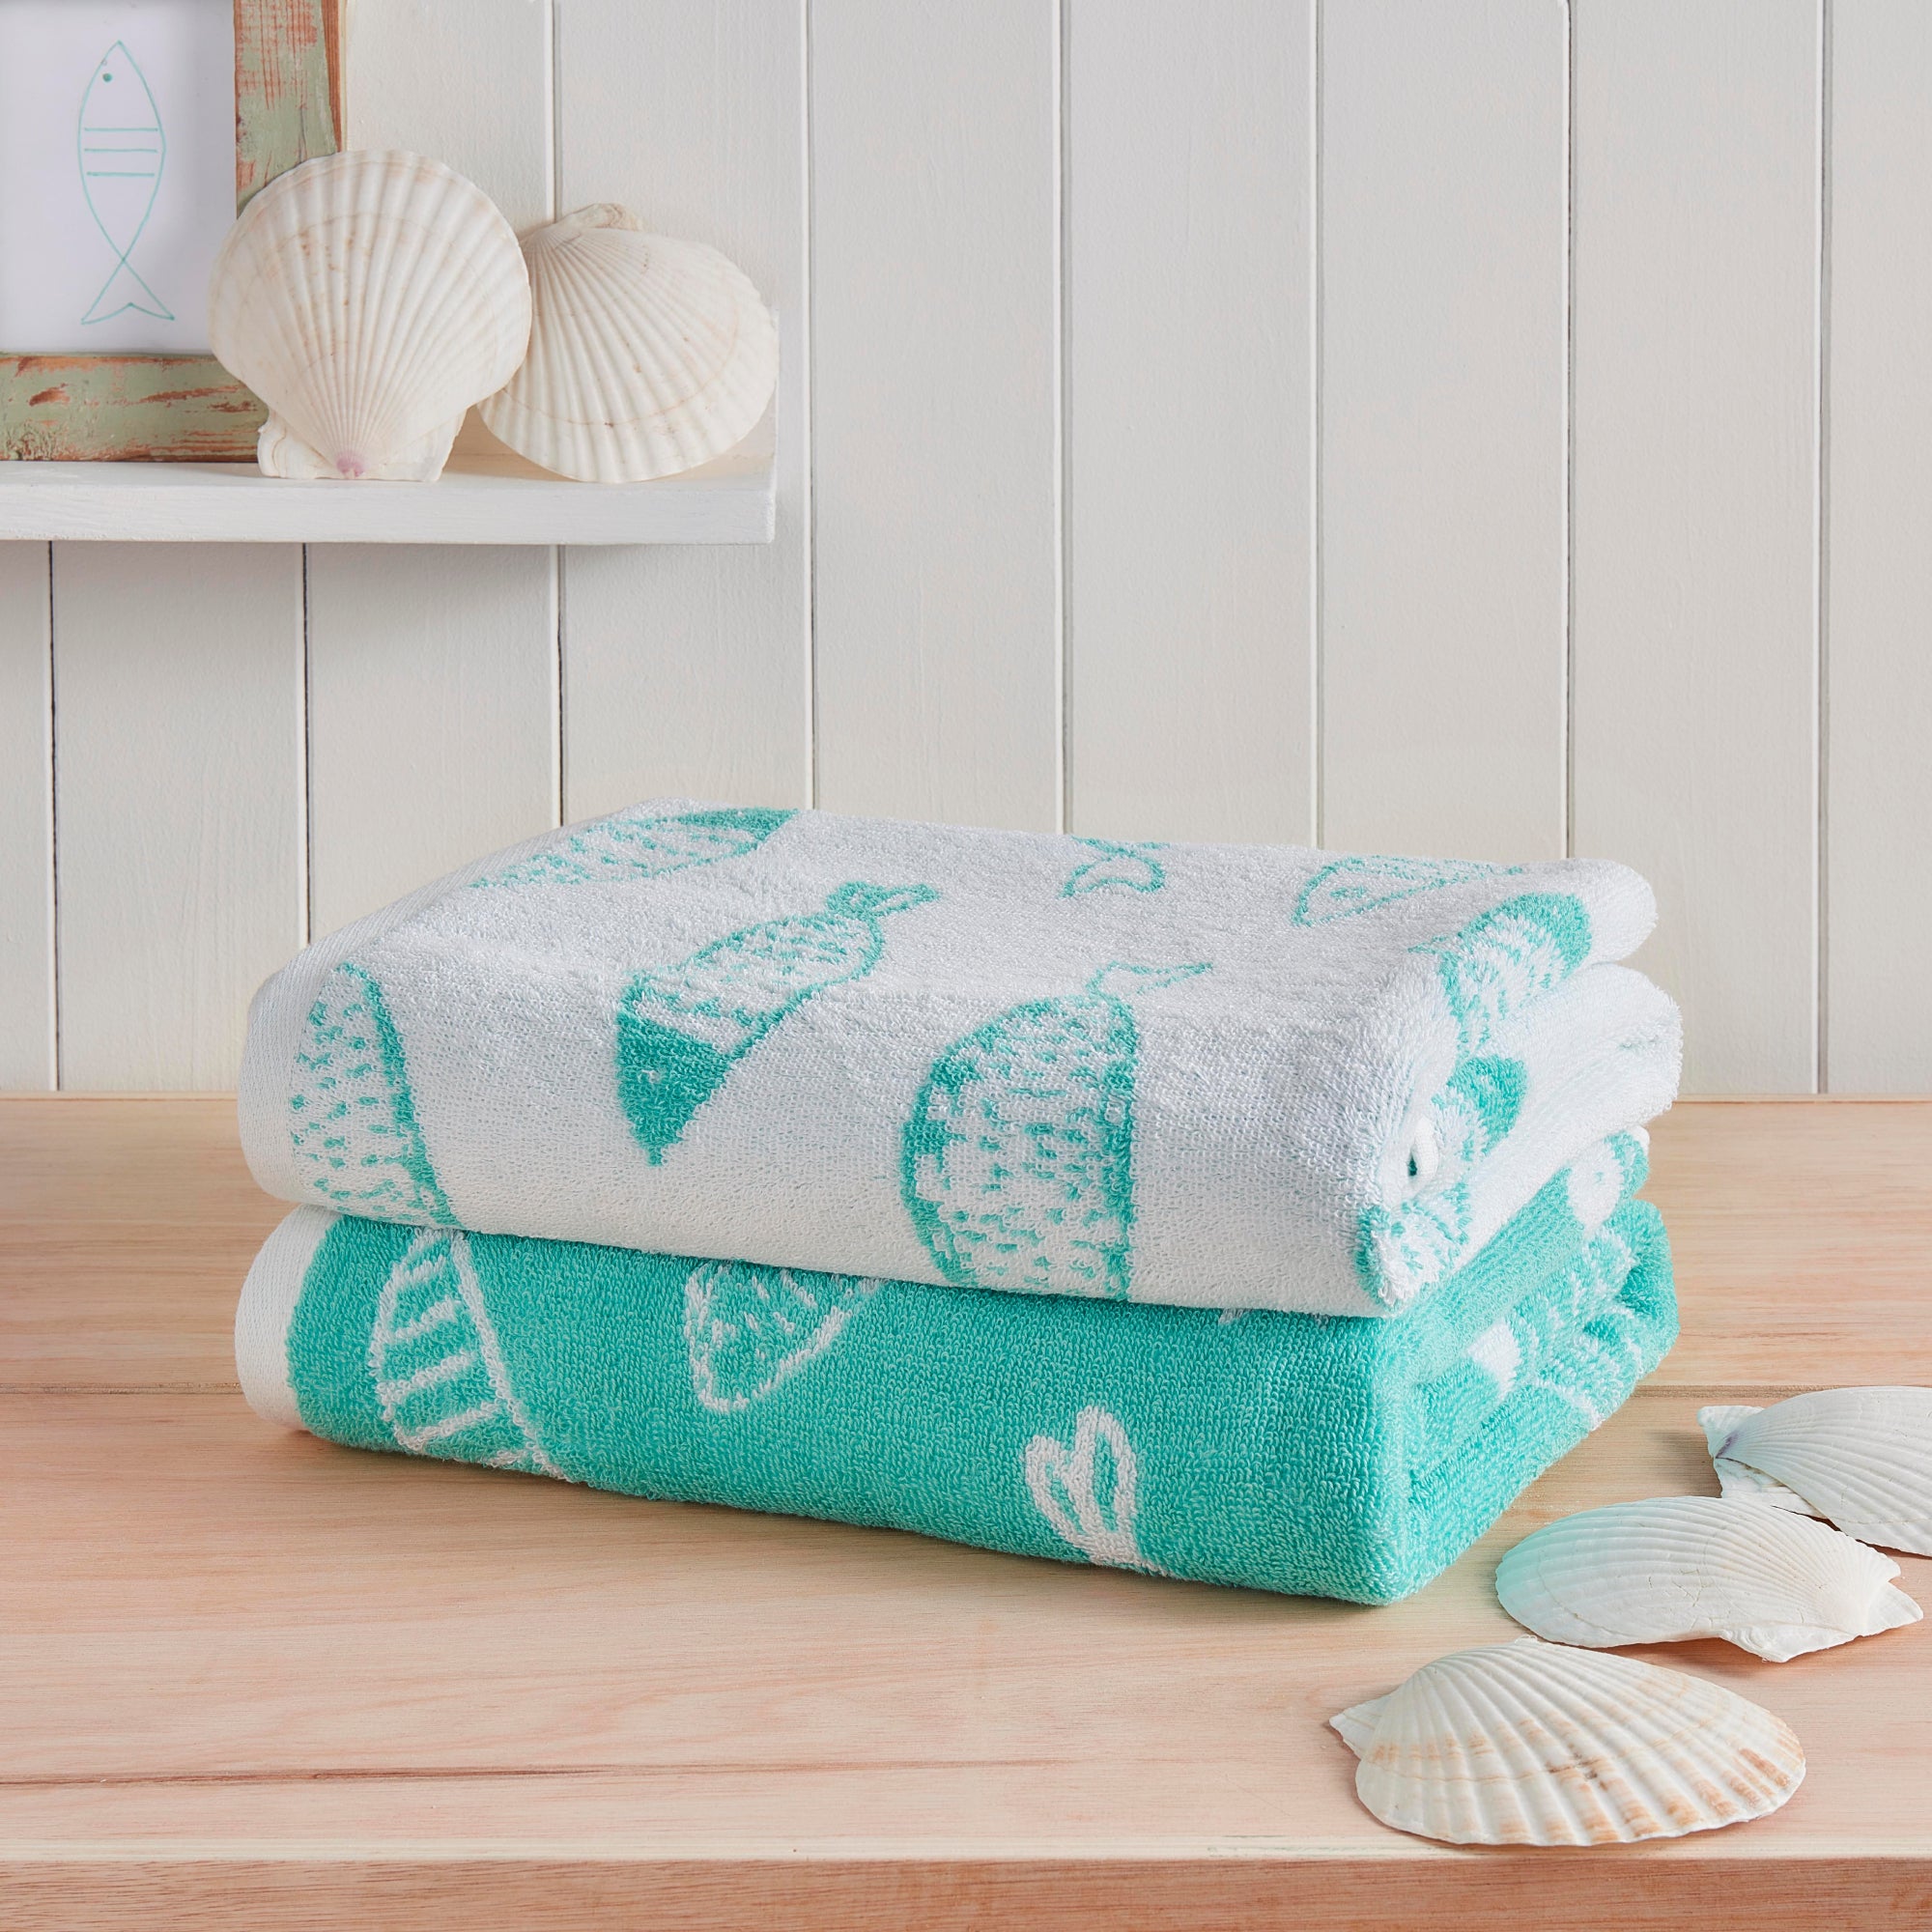 Hand Towel Fish by Fusion in Aqua/White